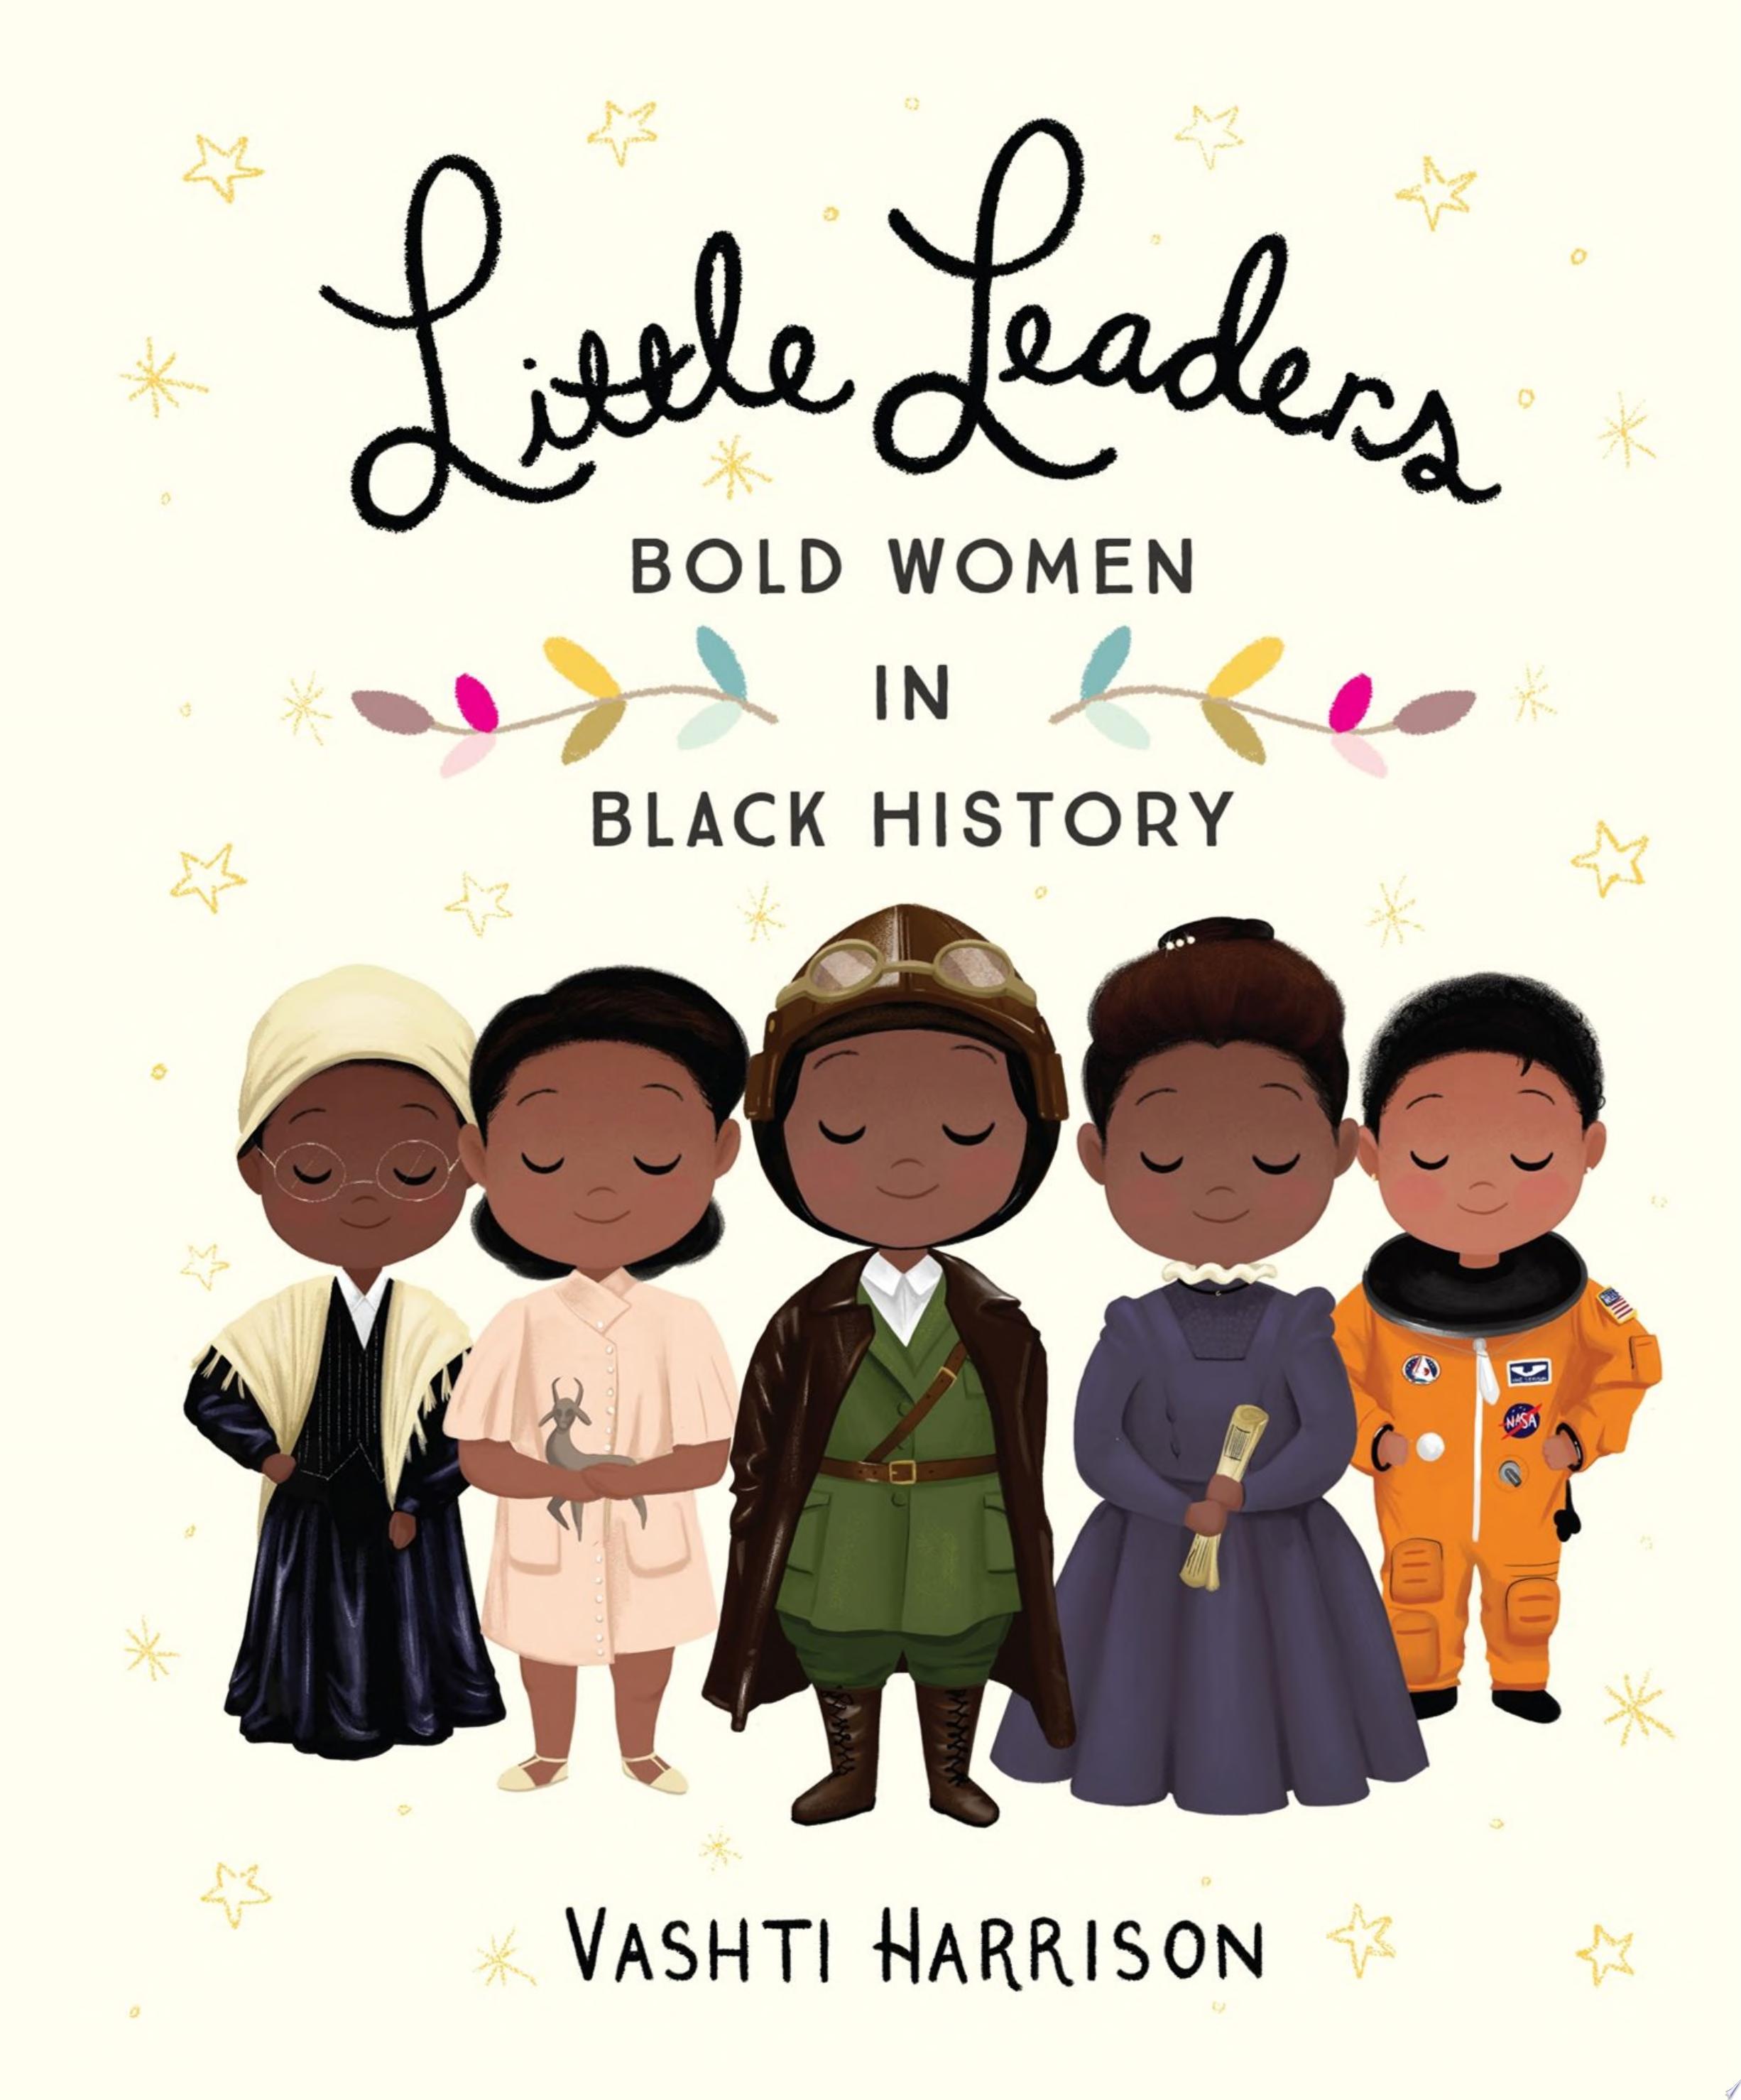 Image for "Little Leaders: Bold Women in Black History"